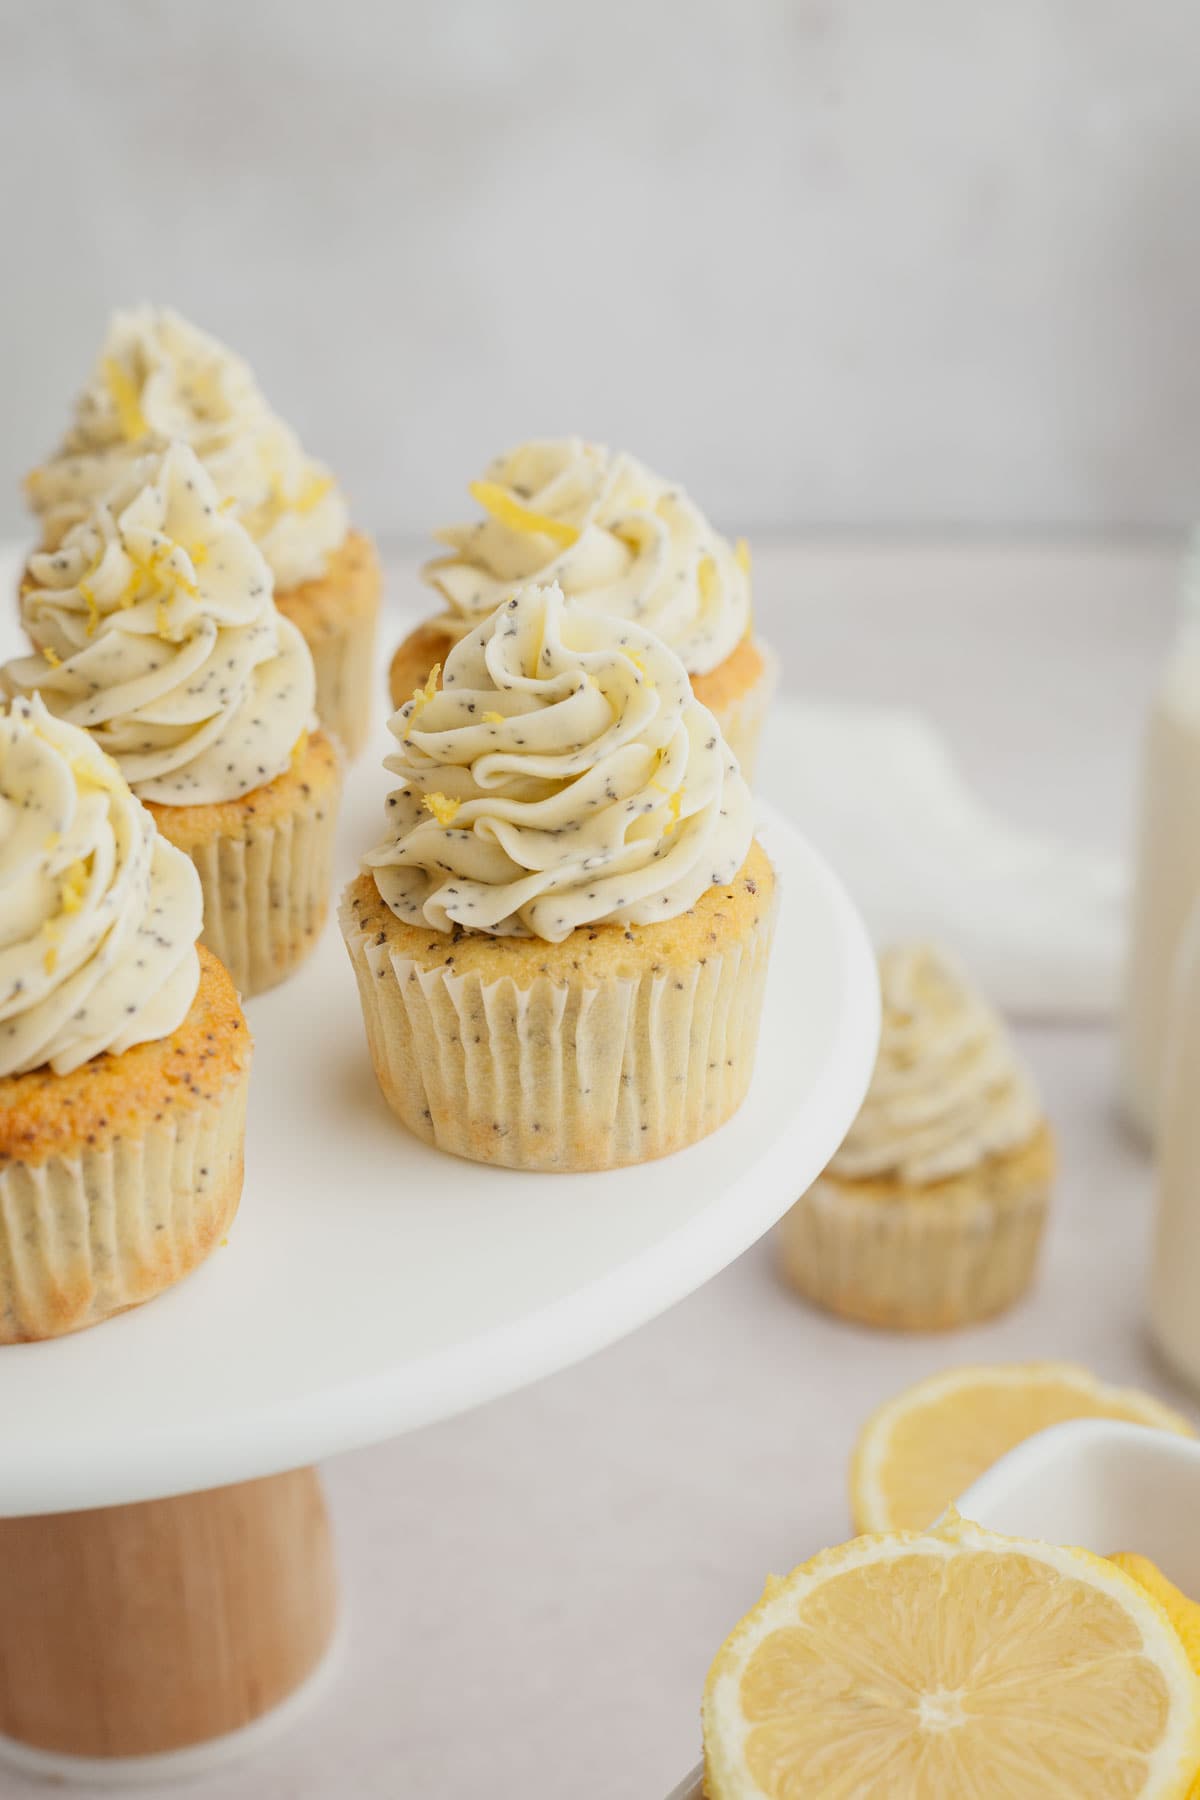 Lemon poppy seed cupcakes on a white cake stand.